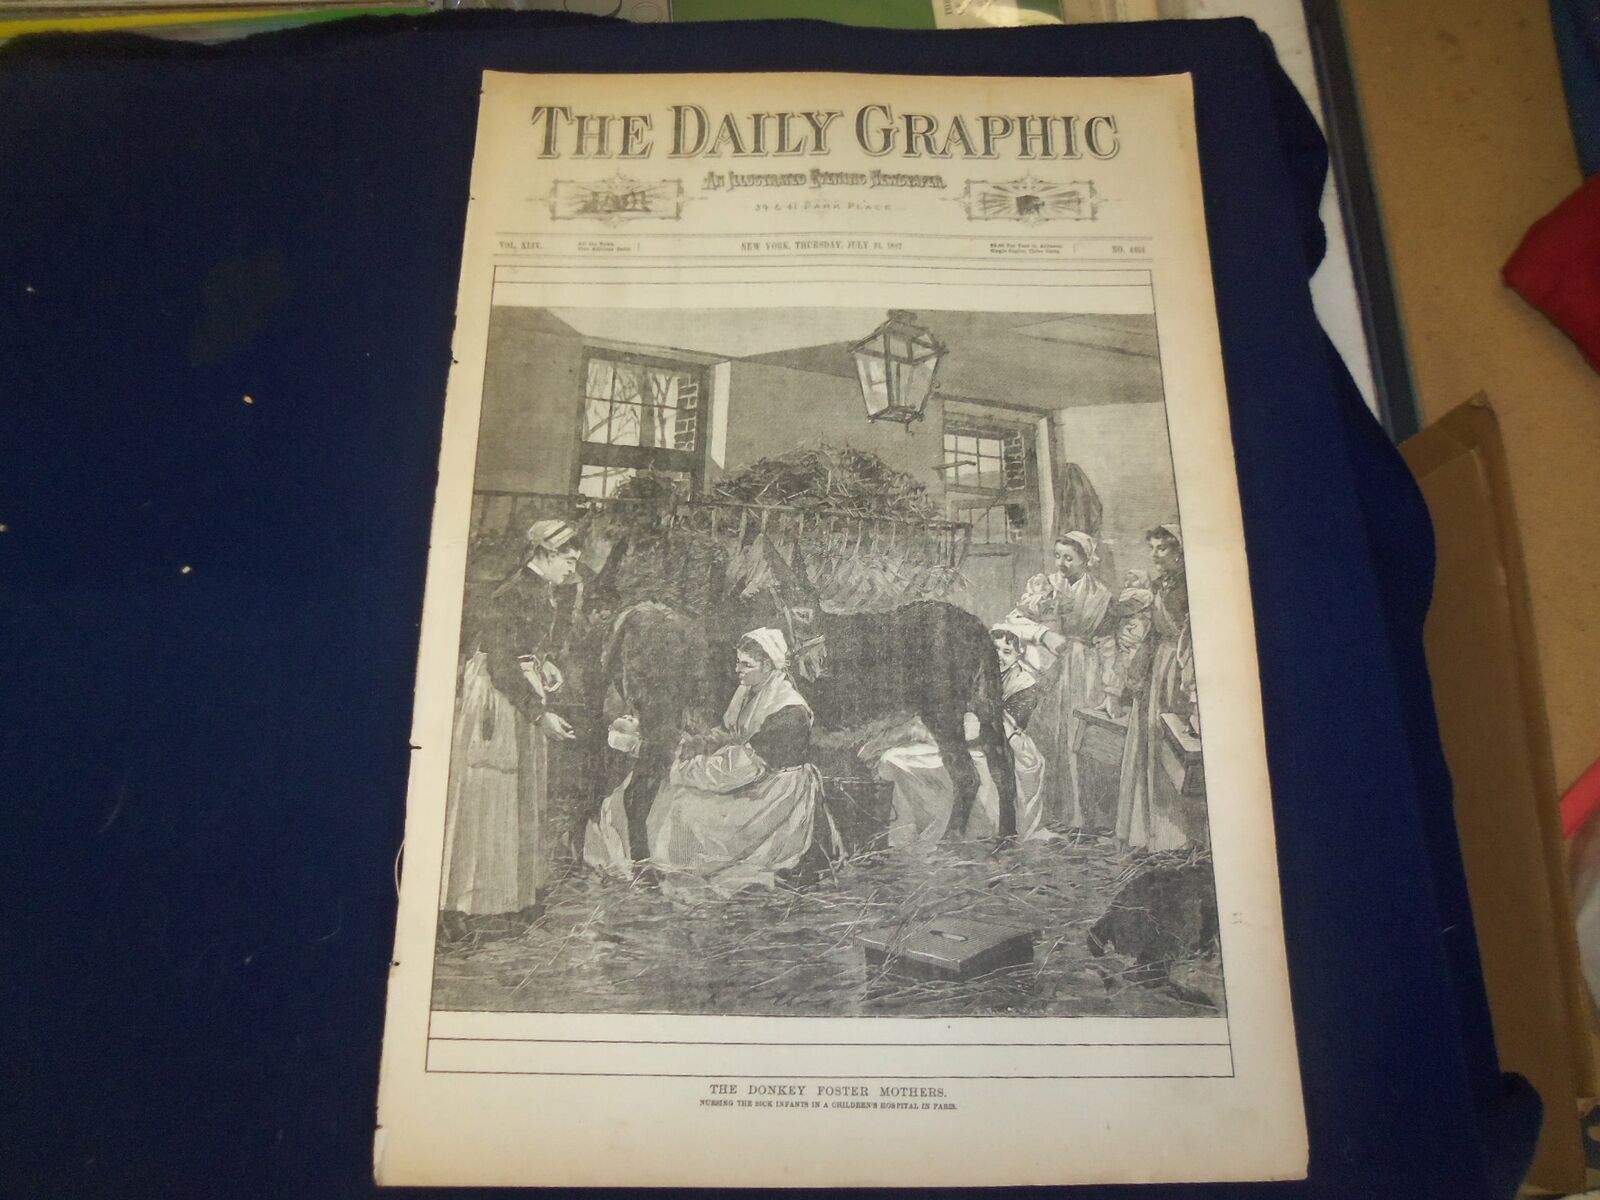 1887 JULY 21 THE DAILY GRAPHIC NEWSPAPER - THE DONKEY FOSTER MOTHERS - NT 7660